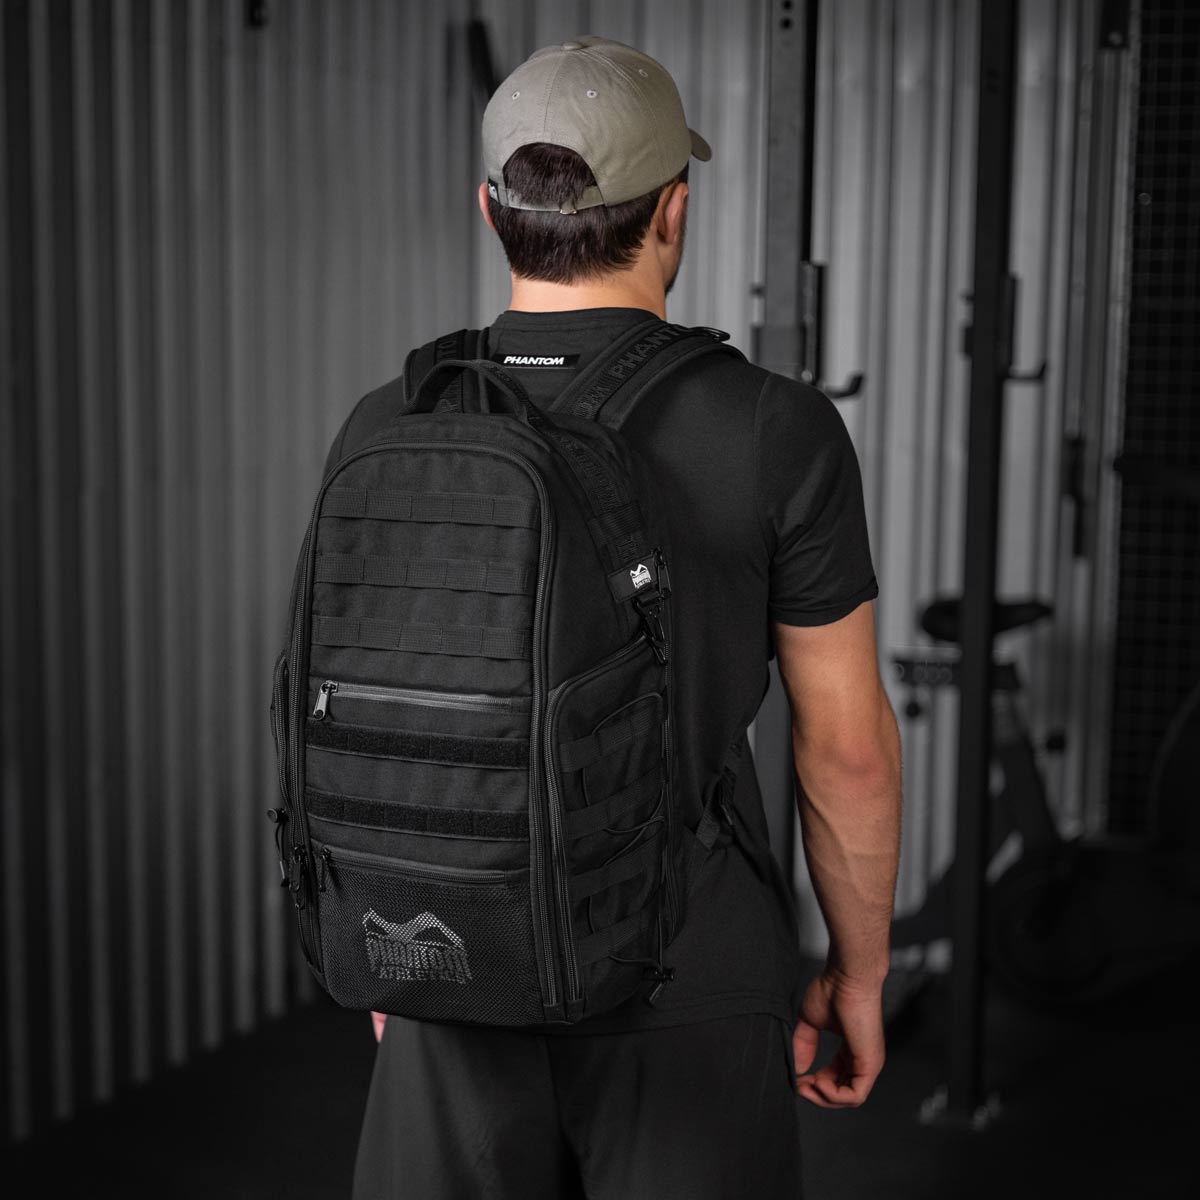 Martial arts backpack | For MMA, wrestling and fitness training - PHANTOM  ATHLETICS